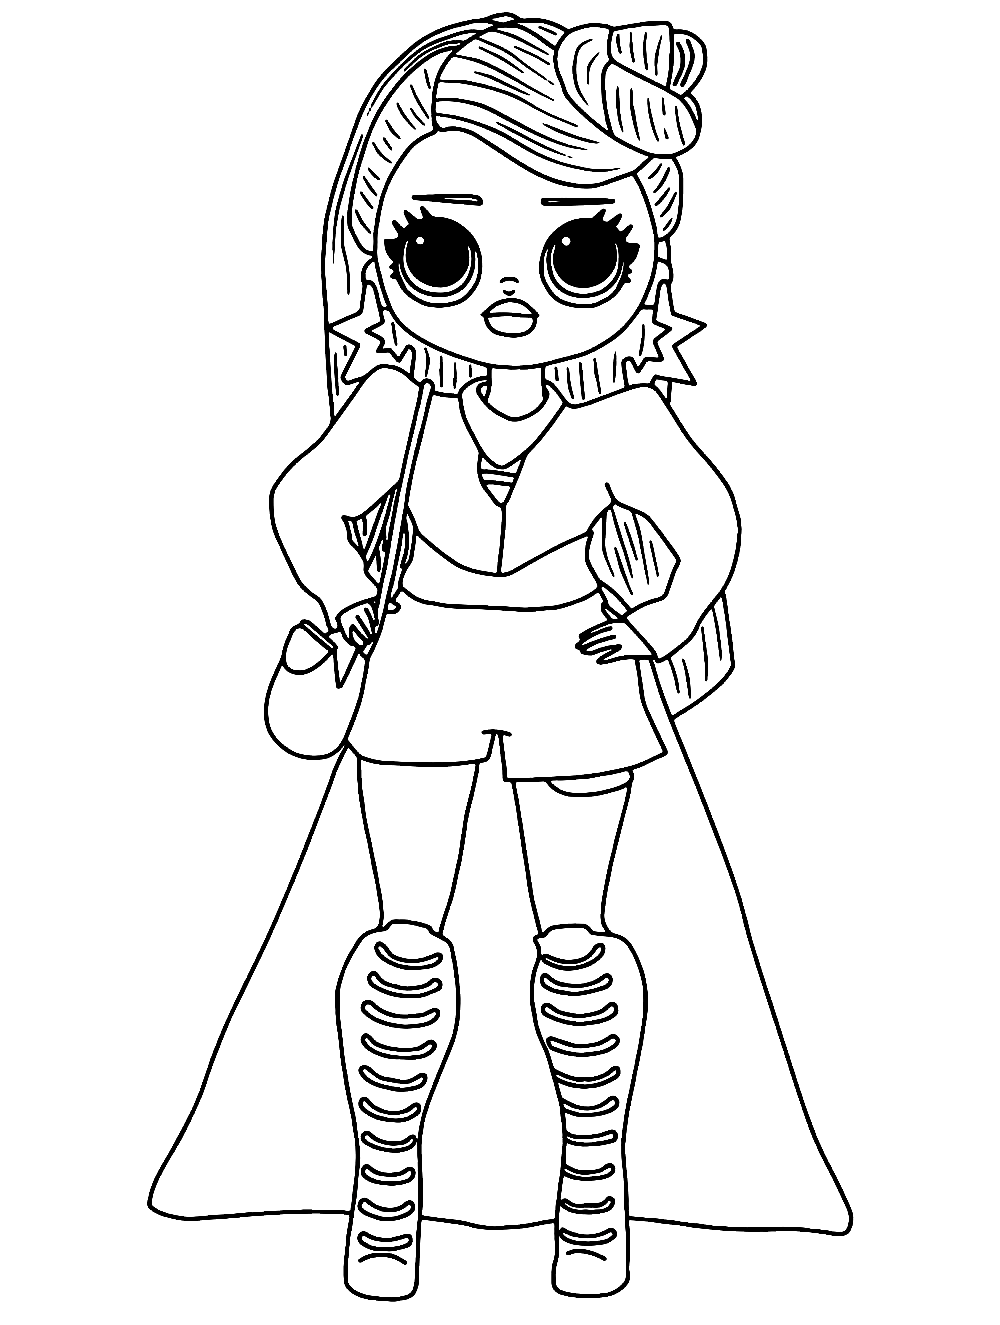 Miss Independent LOL OMG Coloring Page